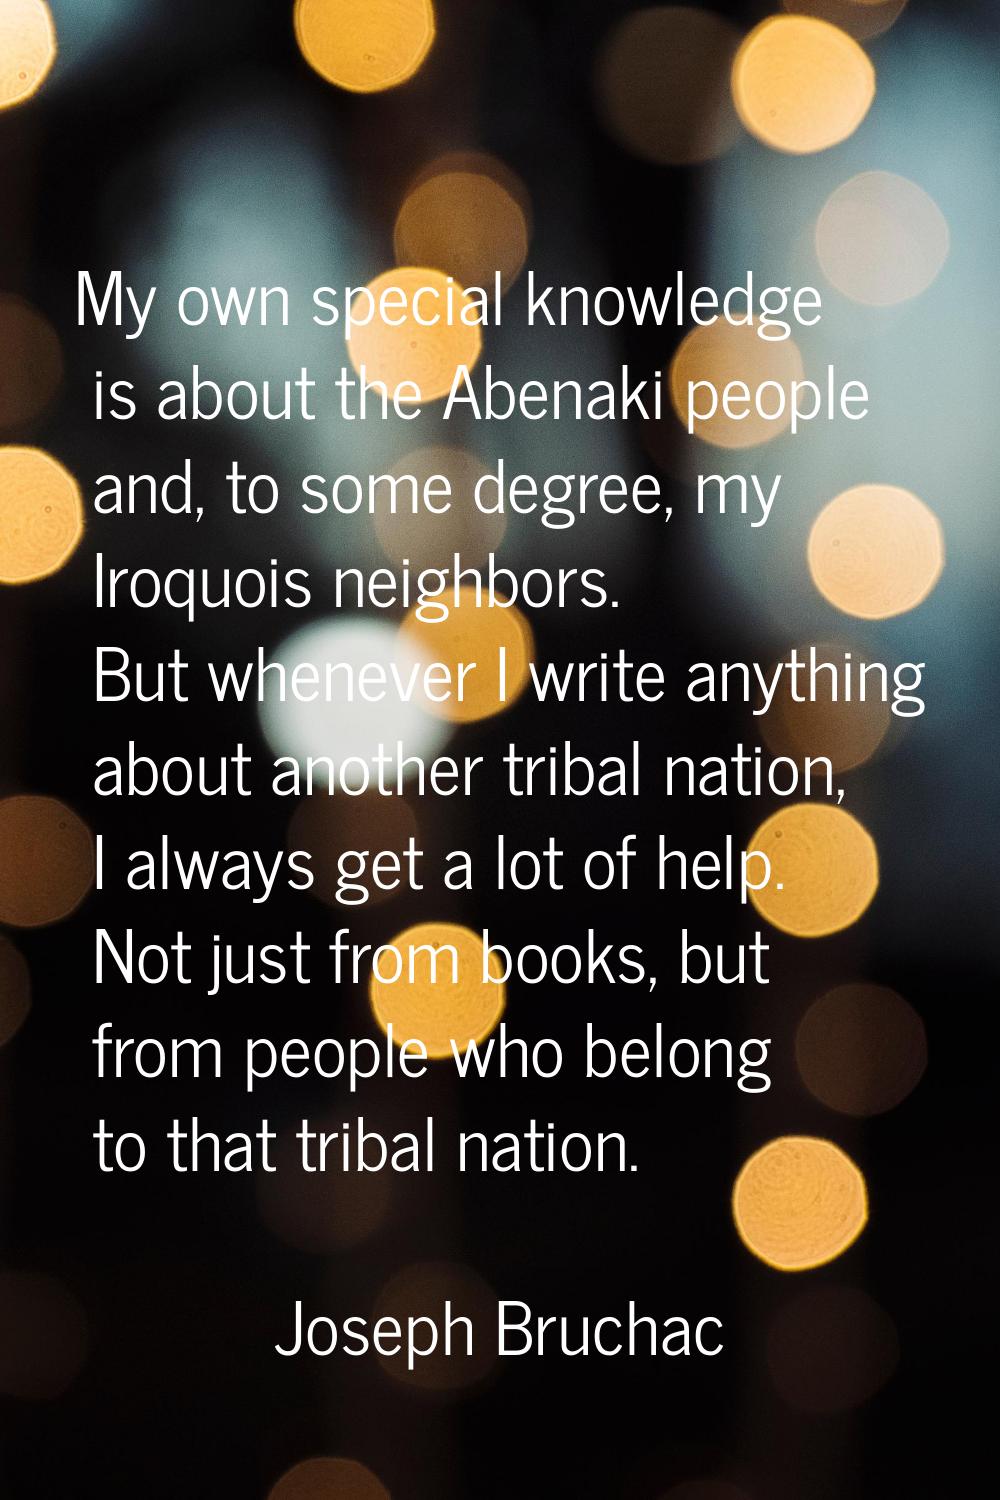 My own special knowledge is about the Abenaki people and, to some degree, my Iroquois neighbors. Bu